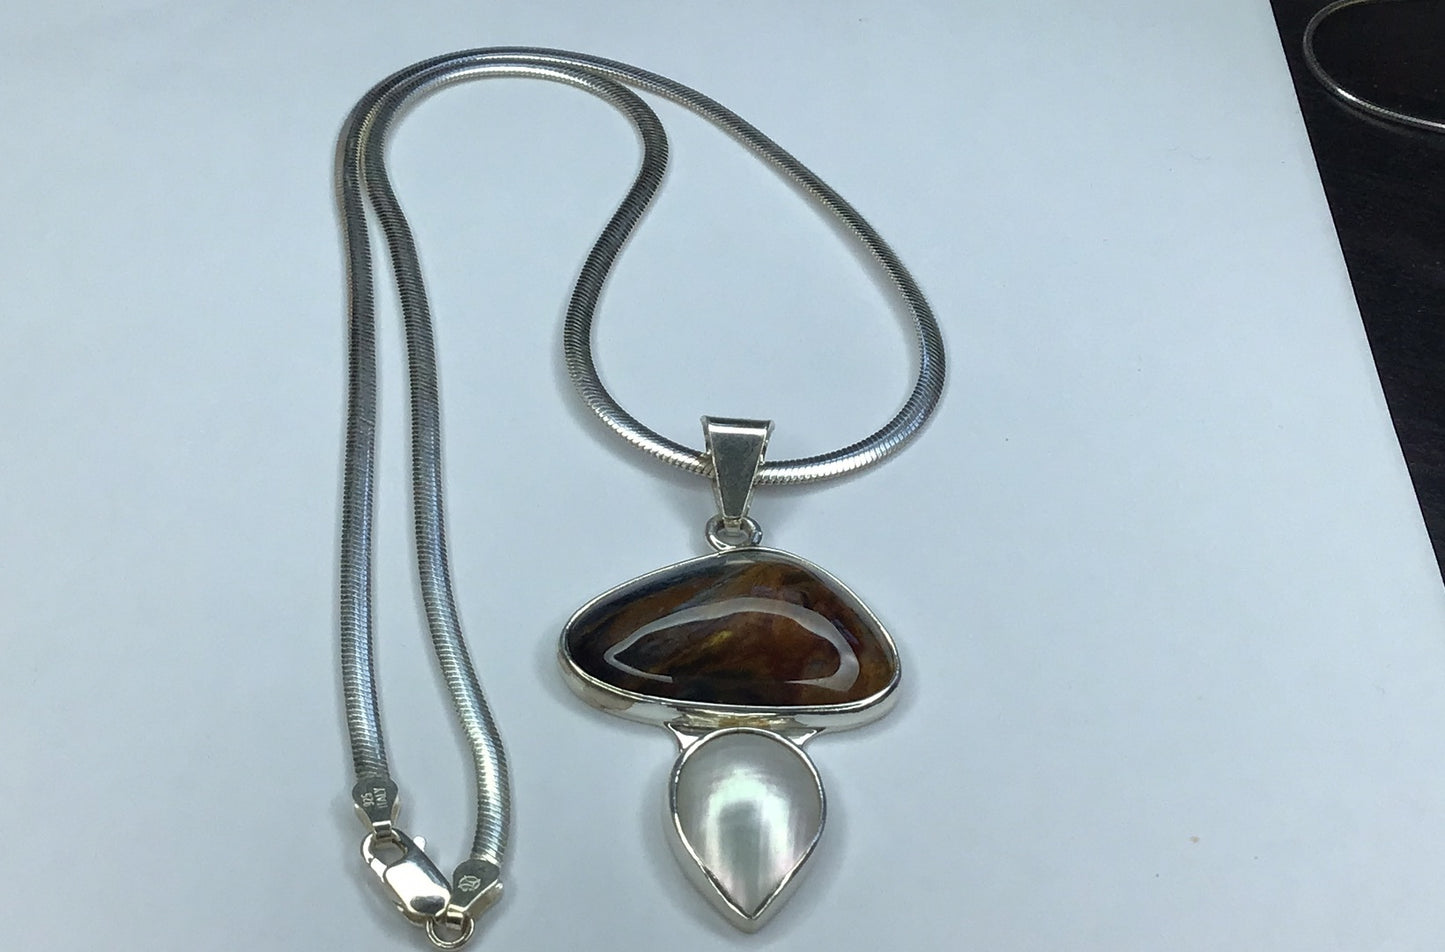 FINE STERLING SILVER 925 JASPER & PEARL LARGE PENDANT HANGING ON A STERLING SILVER 925 ITALIAN OVAL DOMED SNAKE CHAIN 20” - Pawn Man Store